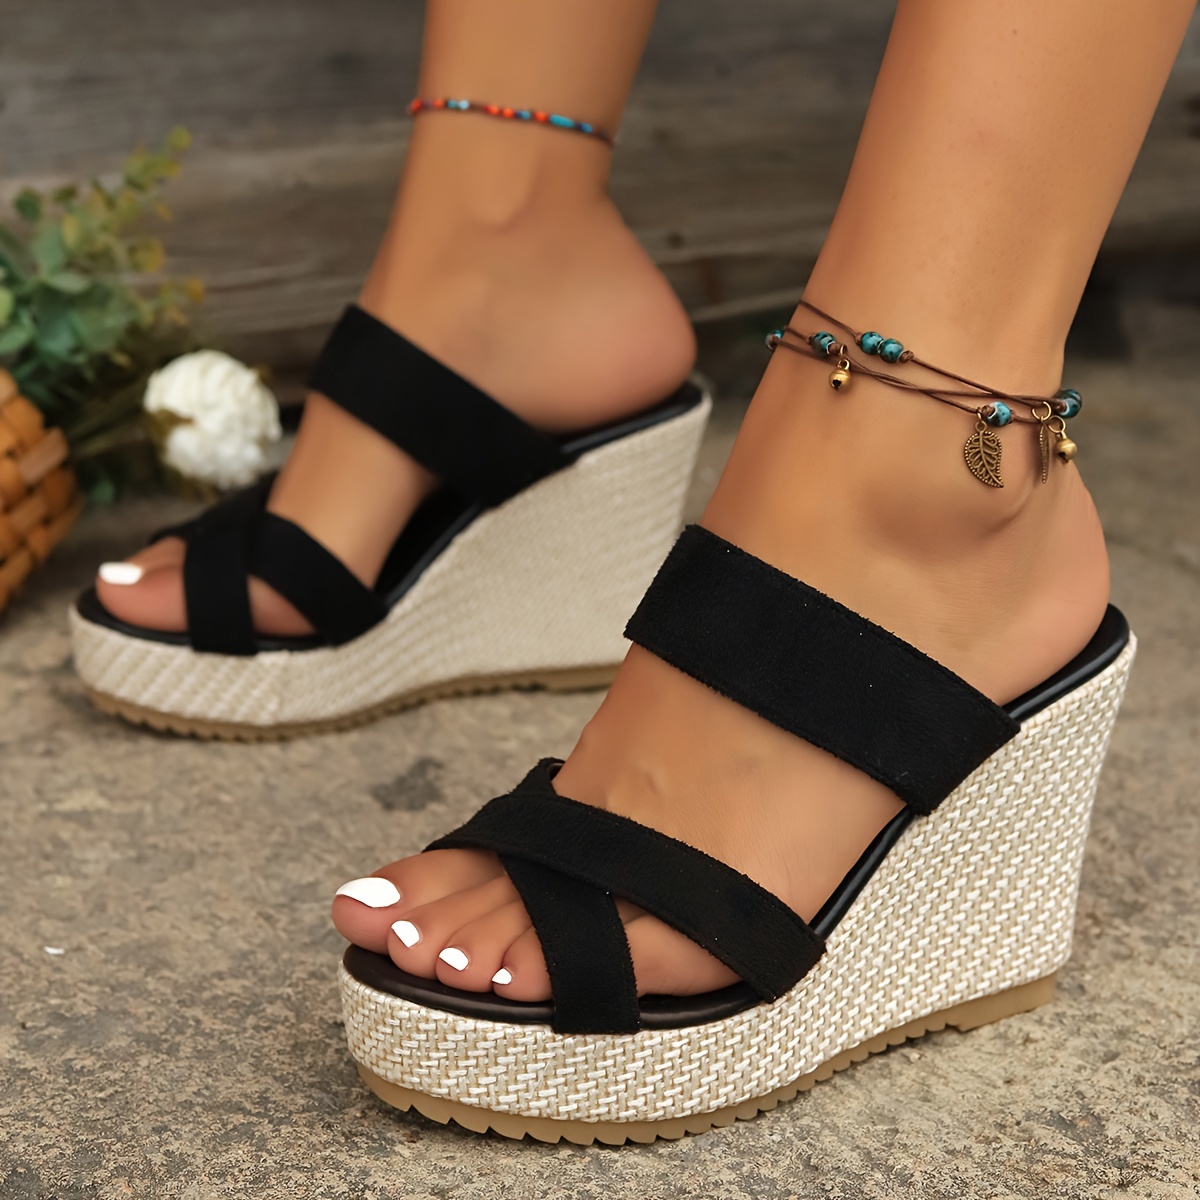 

Women's Solid Color Casual Sandals, Platform Slip On Summer Crisscross Bands Shoes, Summer Wedge Vacation Shoes